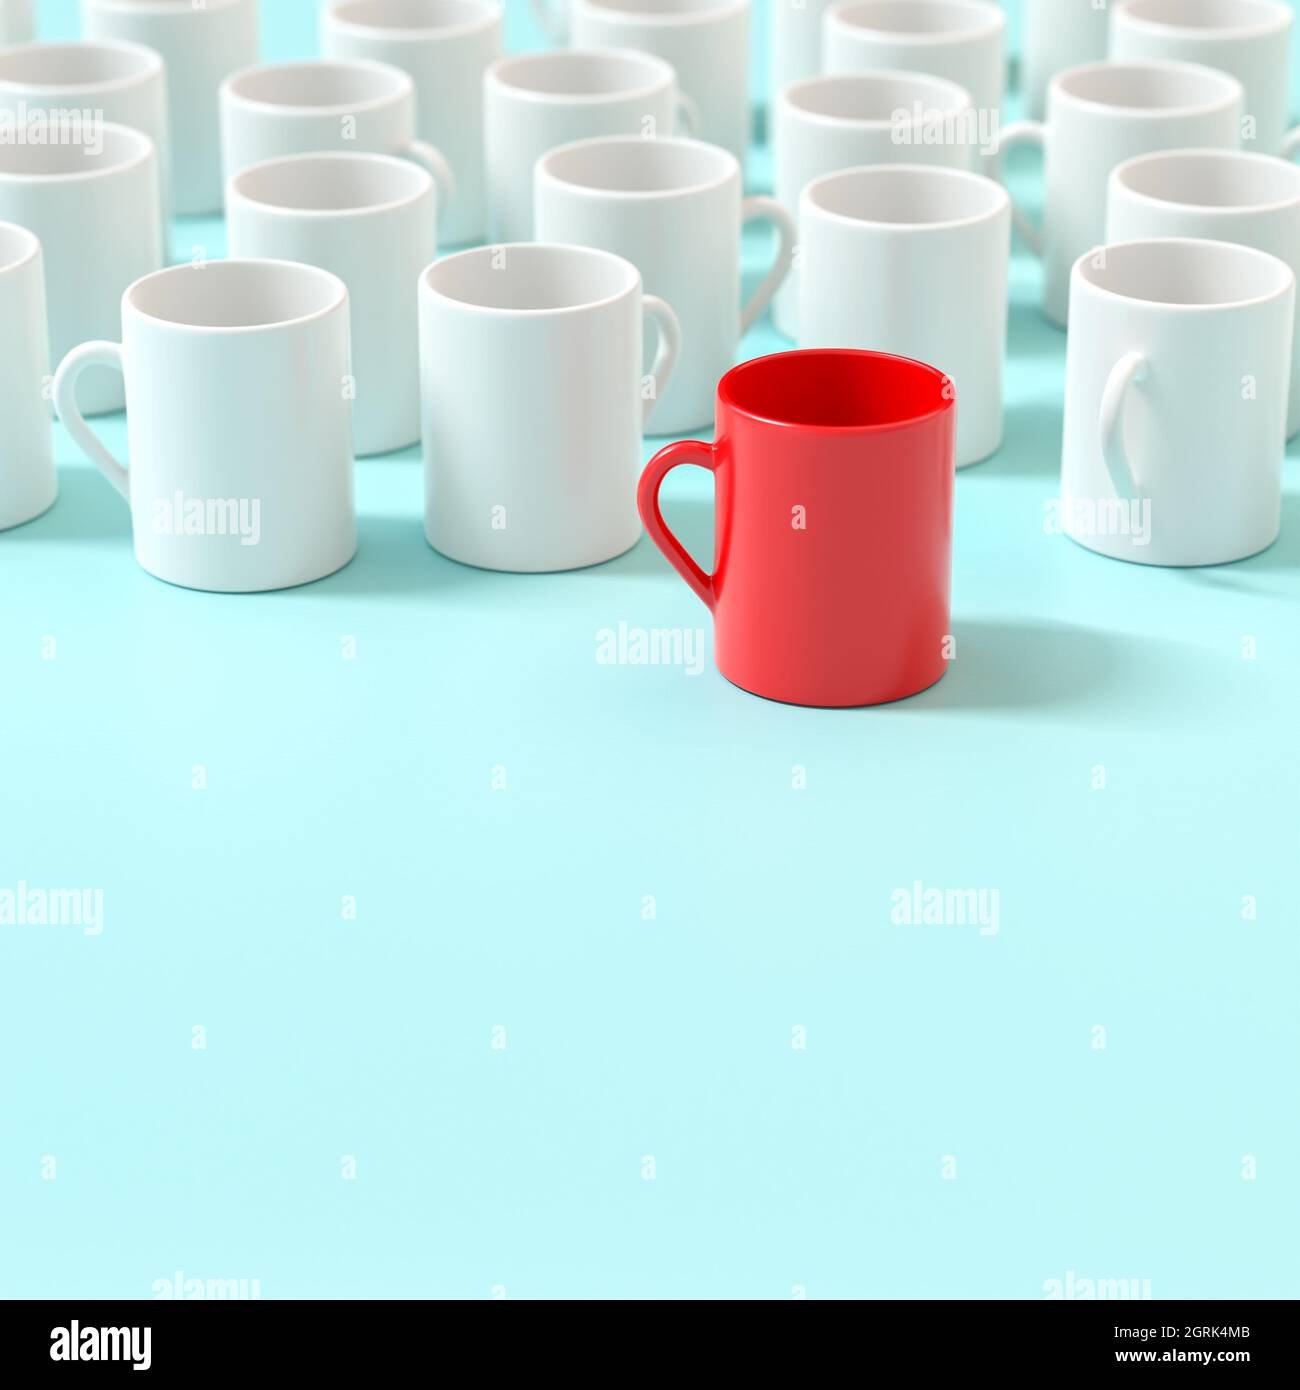 Standing out from the grey mass. Leadership concept. One red mug in front of white mugs. Stock Photo